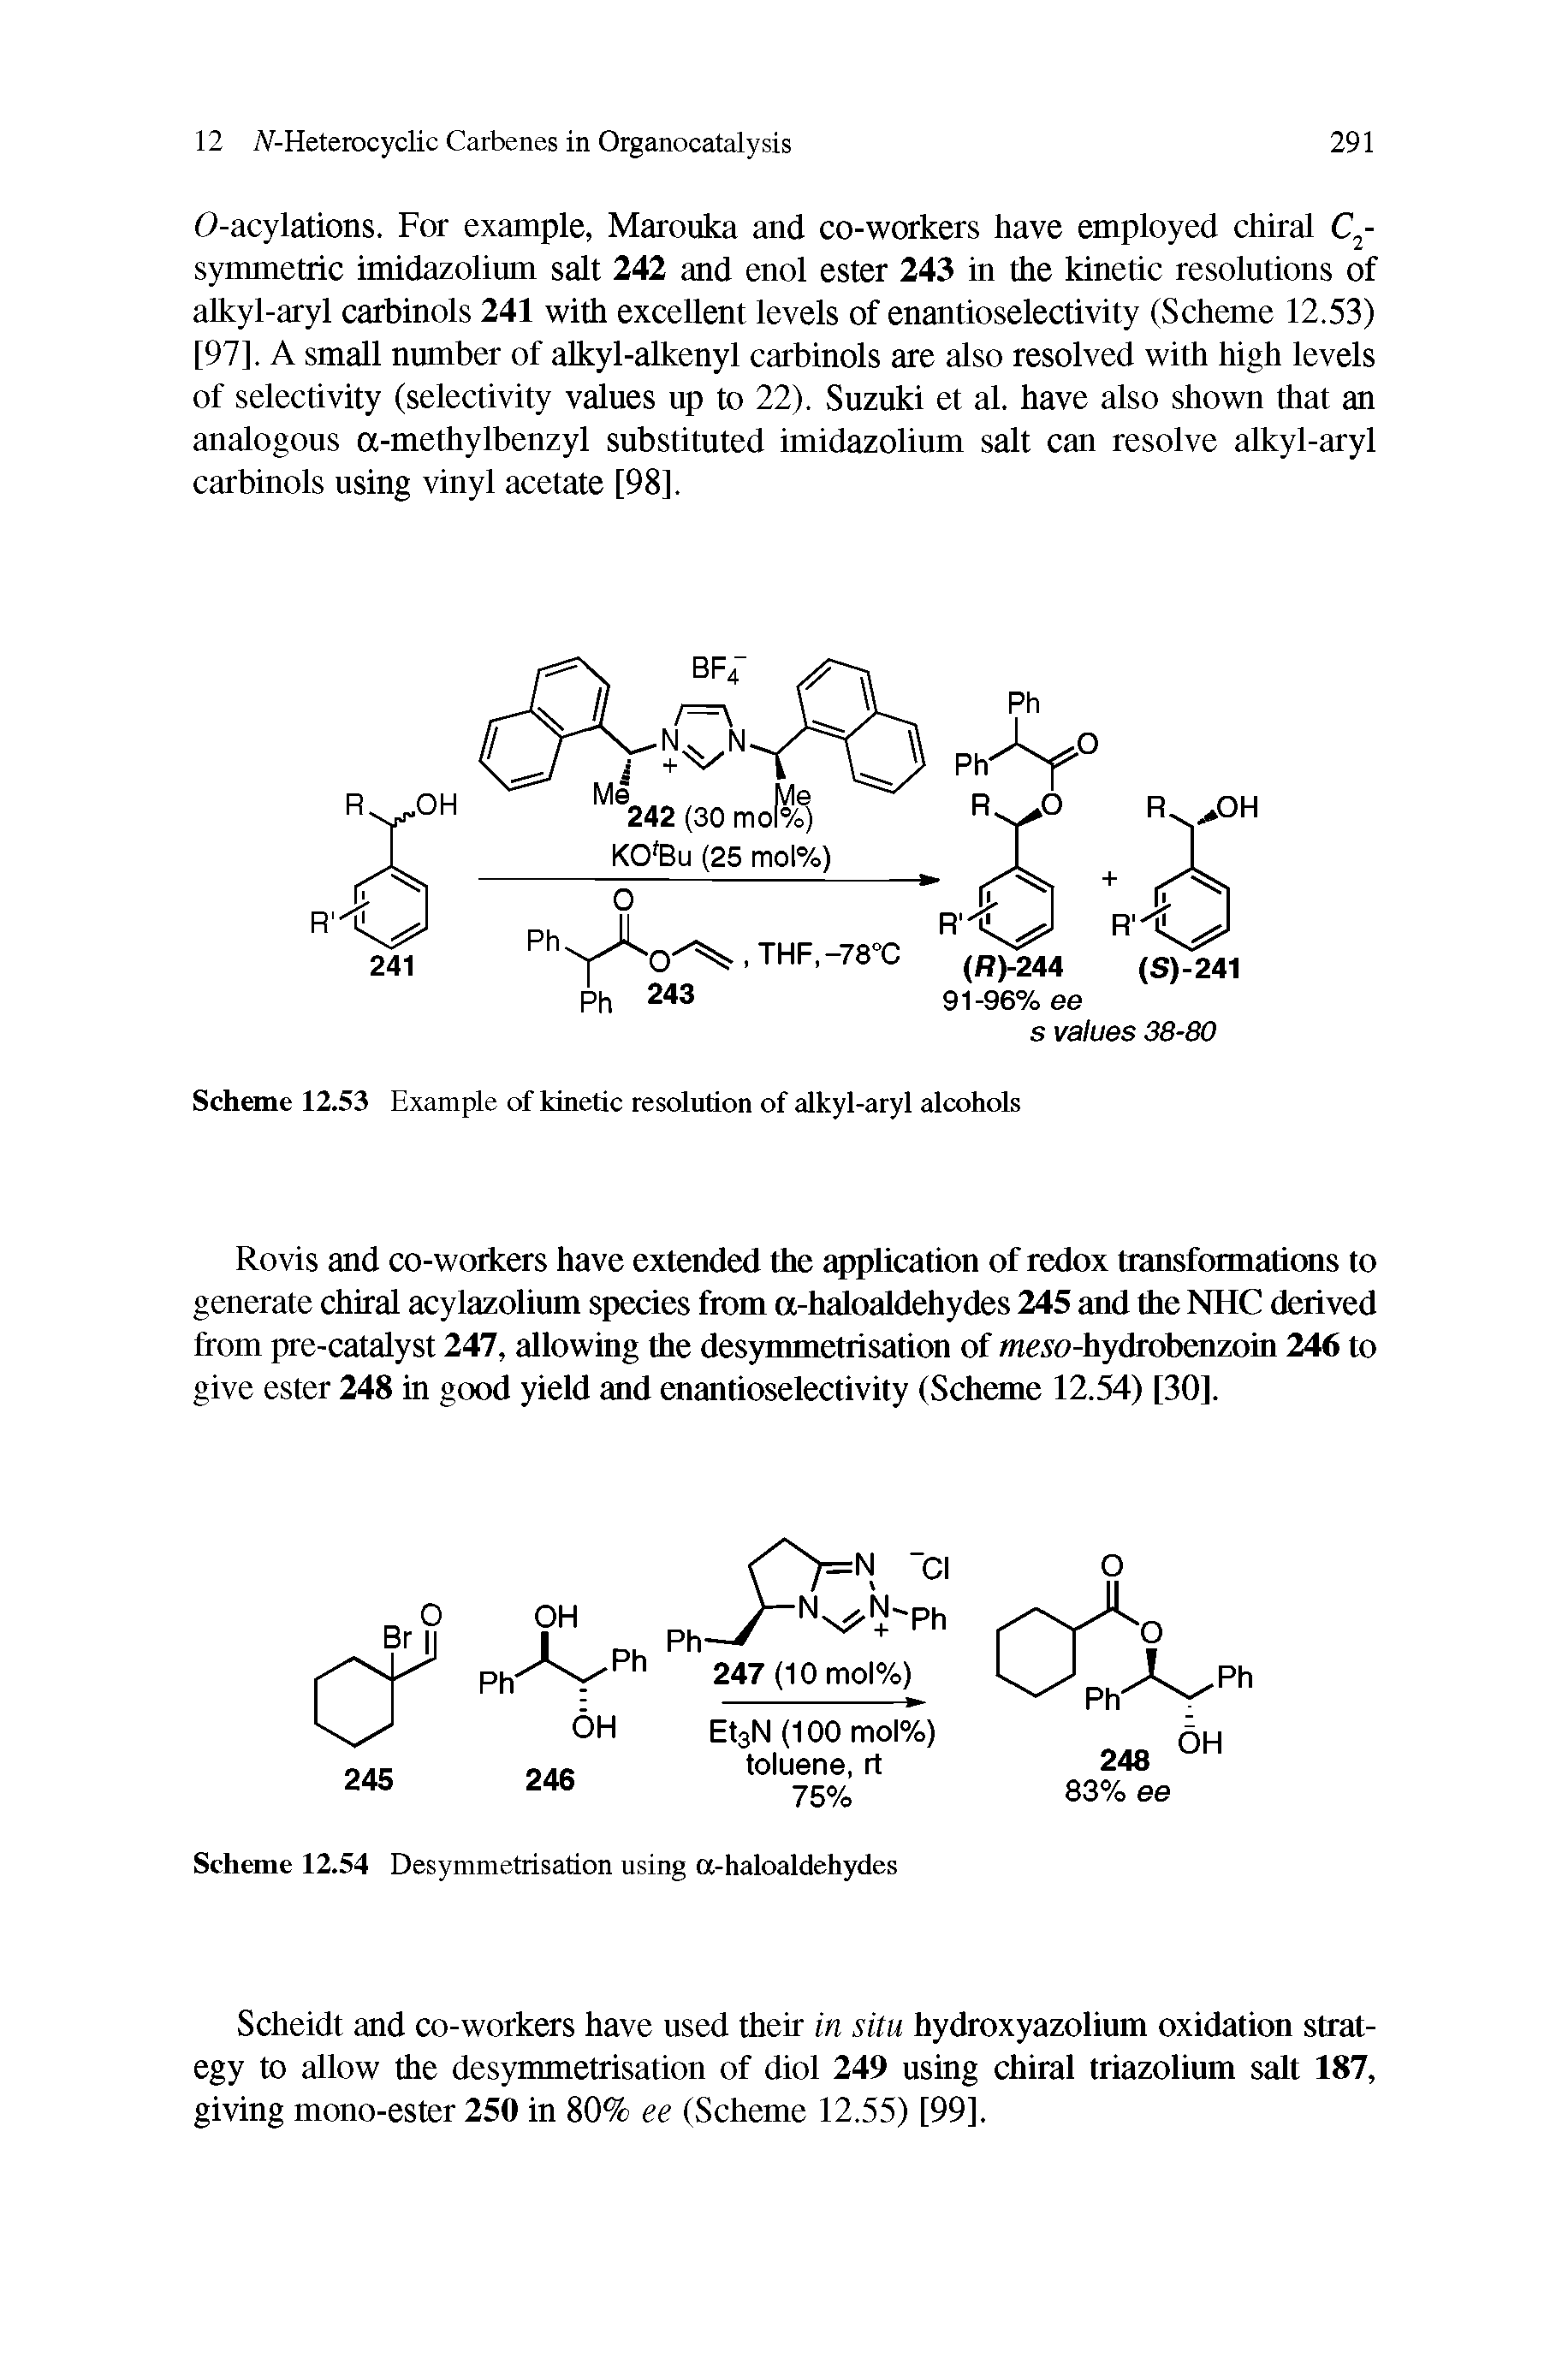 Scheme 12.53 Example of kinetic resolution of alkyl-aryl alcohols...